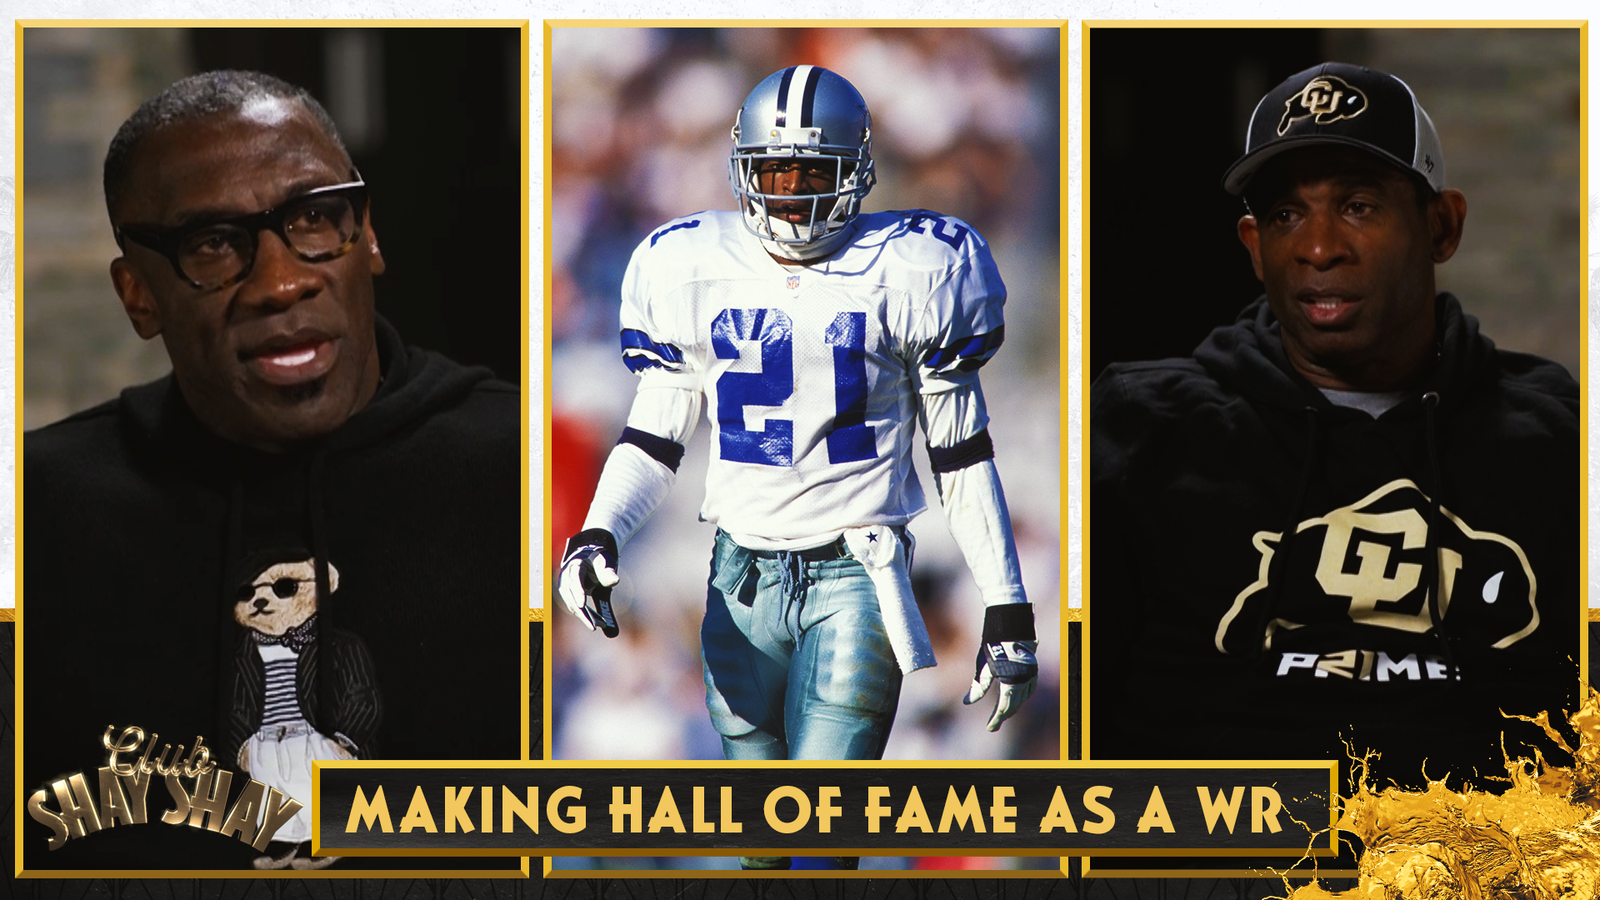 Deion Sanders believes he could've made the Hall of Fame as a receiver